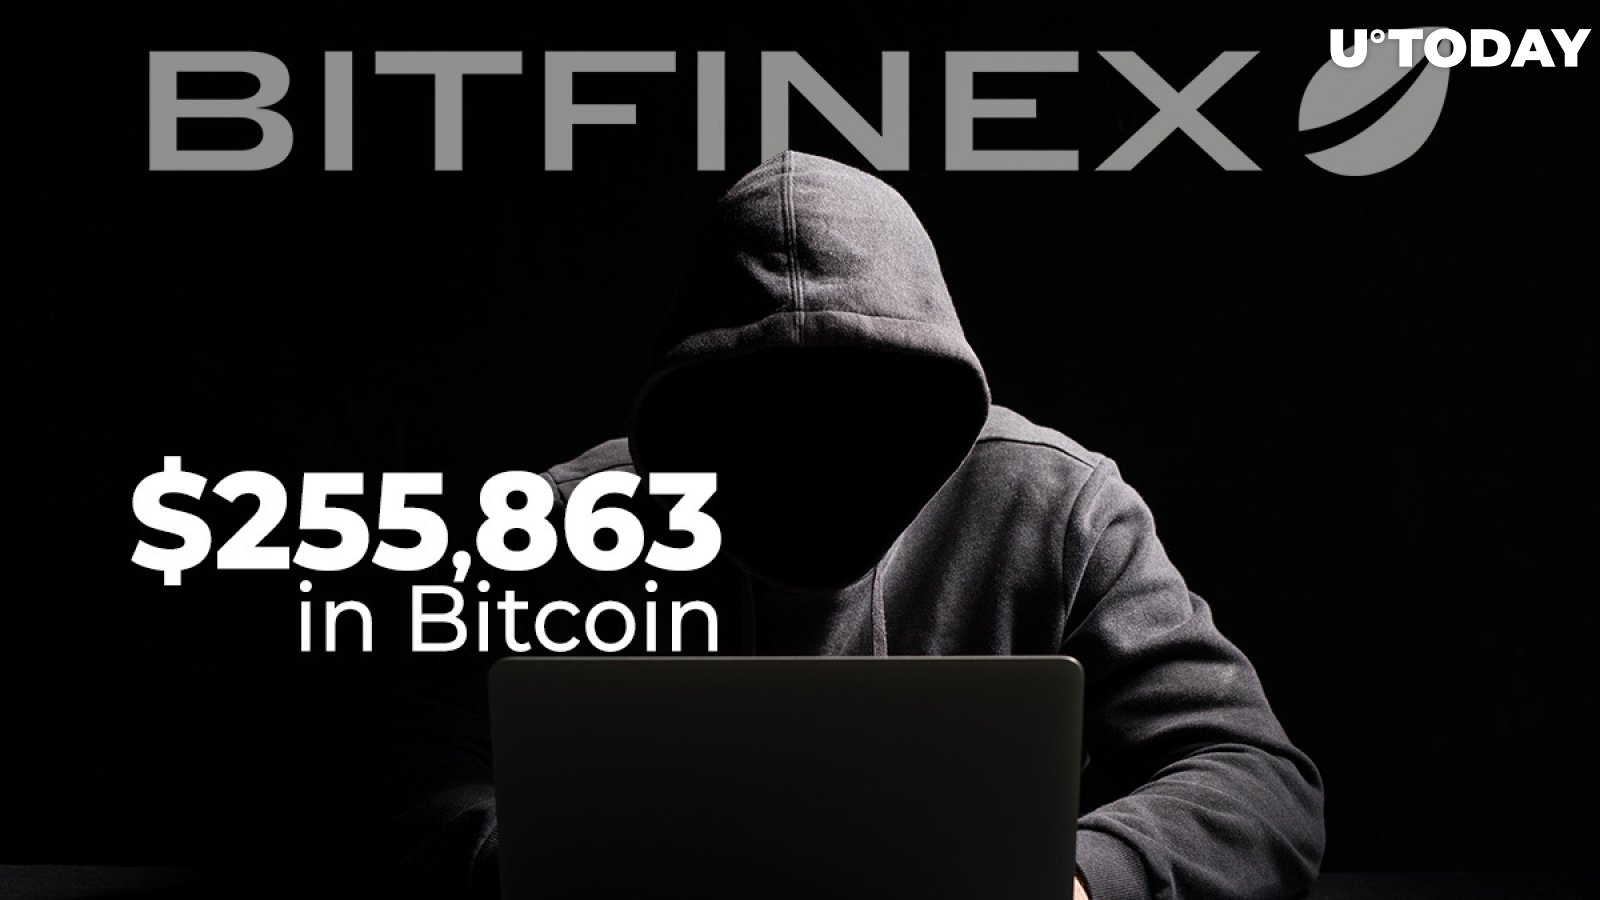 Hackers Move $255,863 in Bitcoin from Bitfinex Hack in 2016